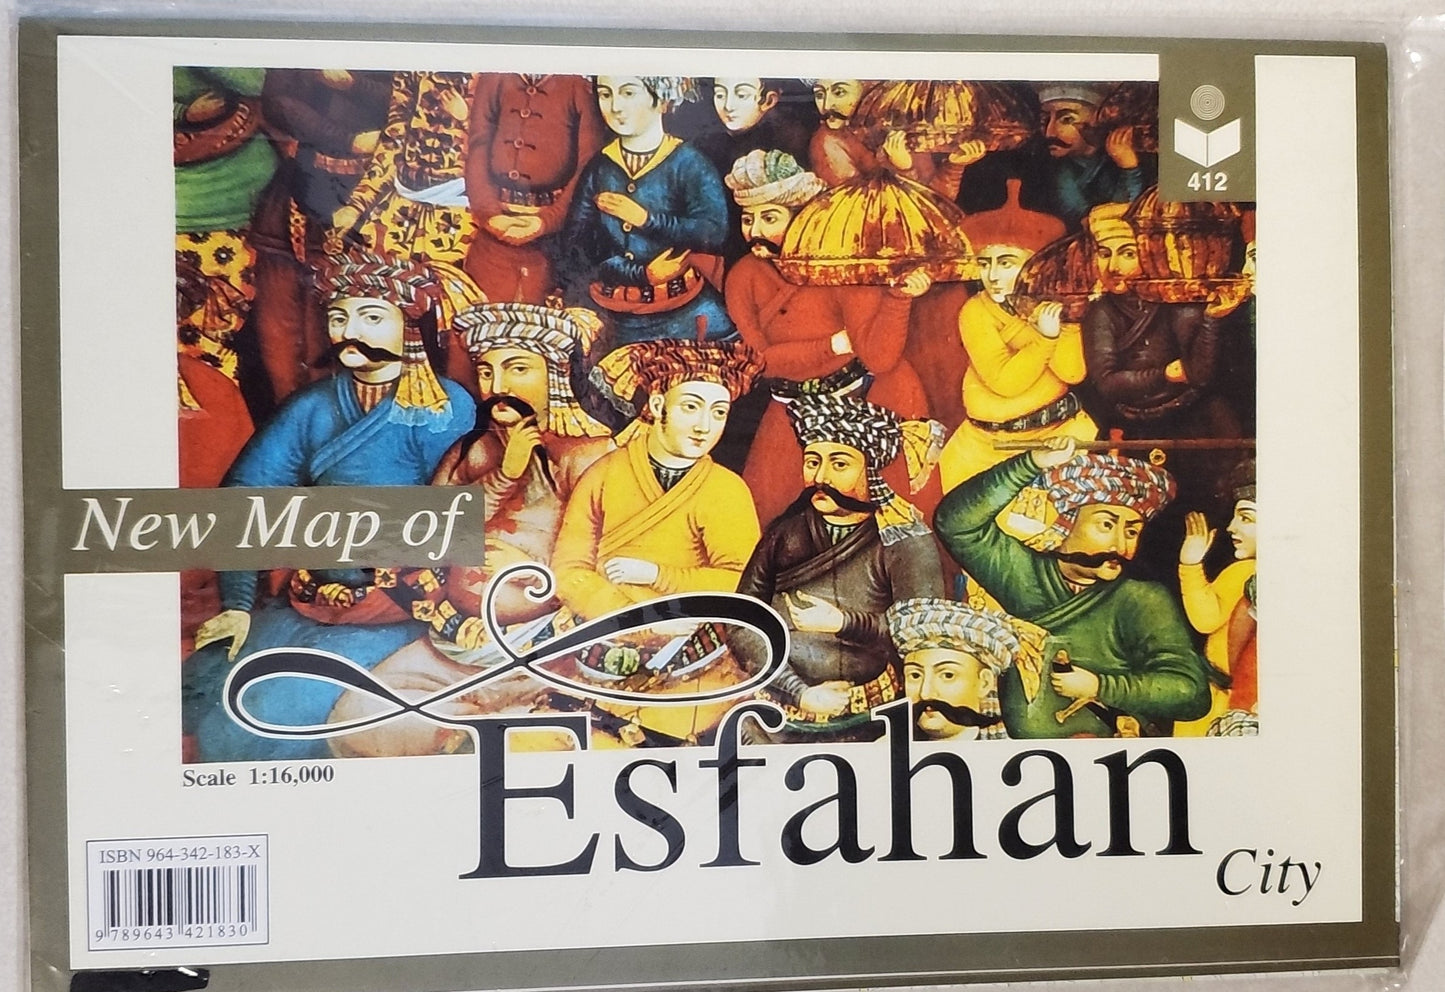 New map of Esfahan city